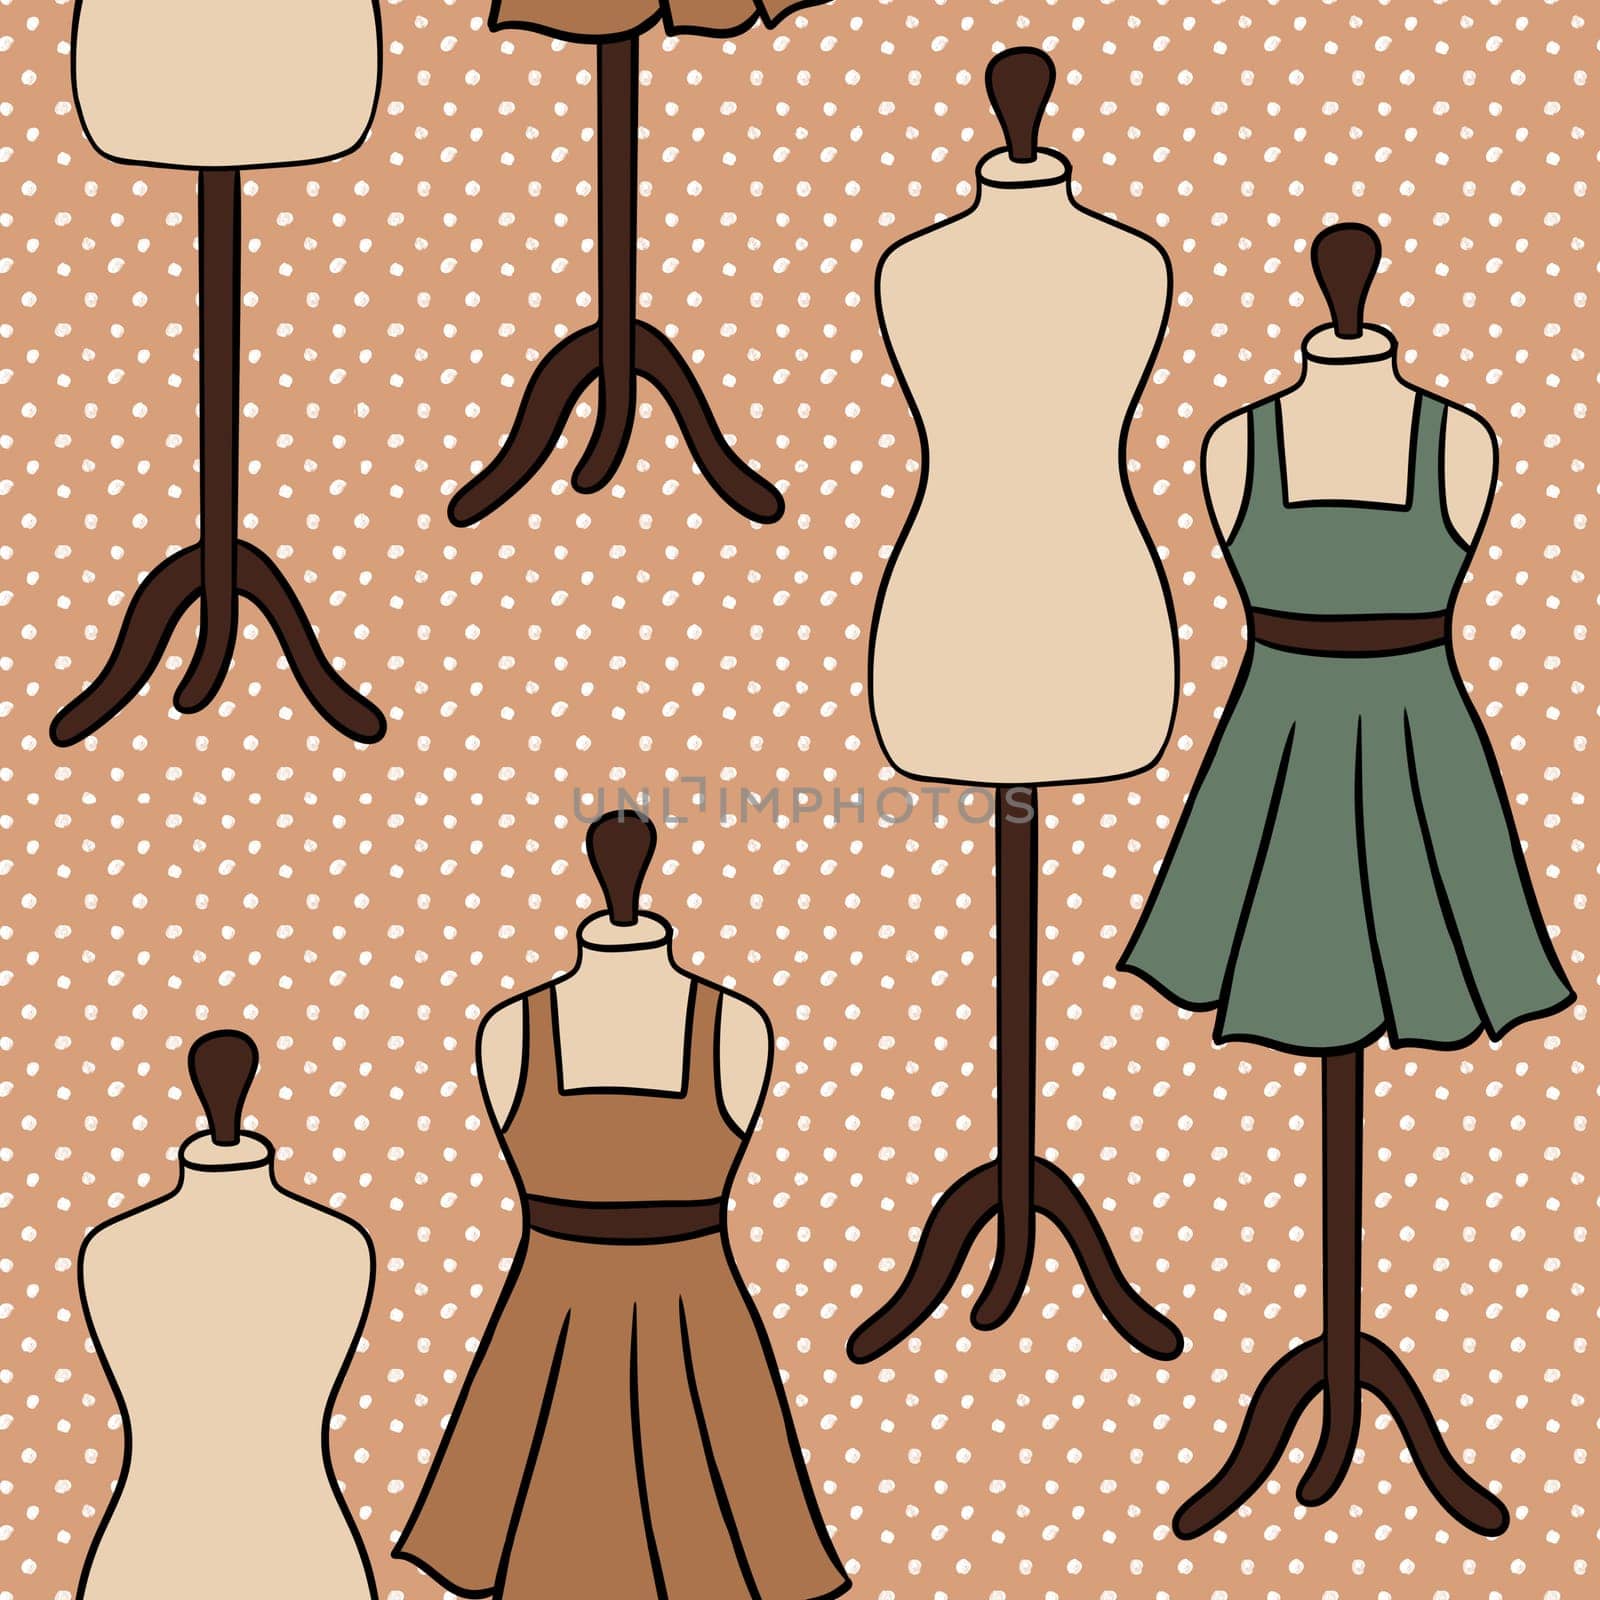 Hand drawn seamless pattern with mannequin dress clothes sewing crafts dressmaking items. Sage green brown beige polka dot background, tailor cute sew print, handmade needwork business hobby, fabric. by Lagmar